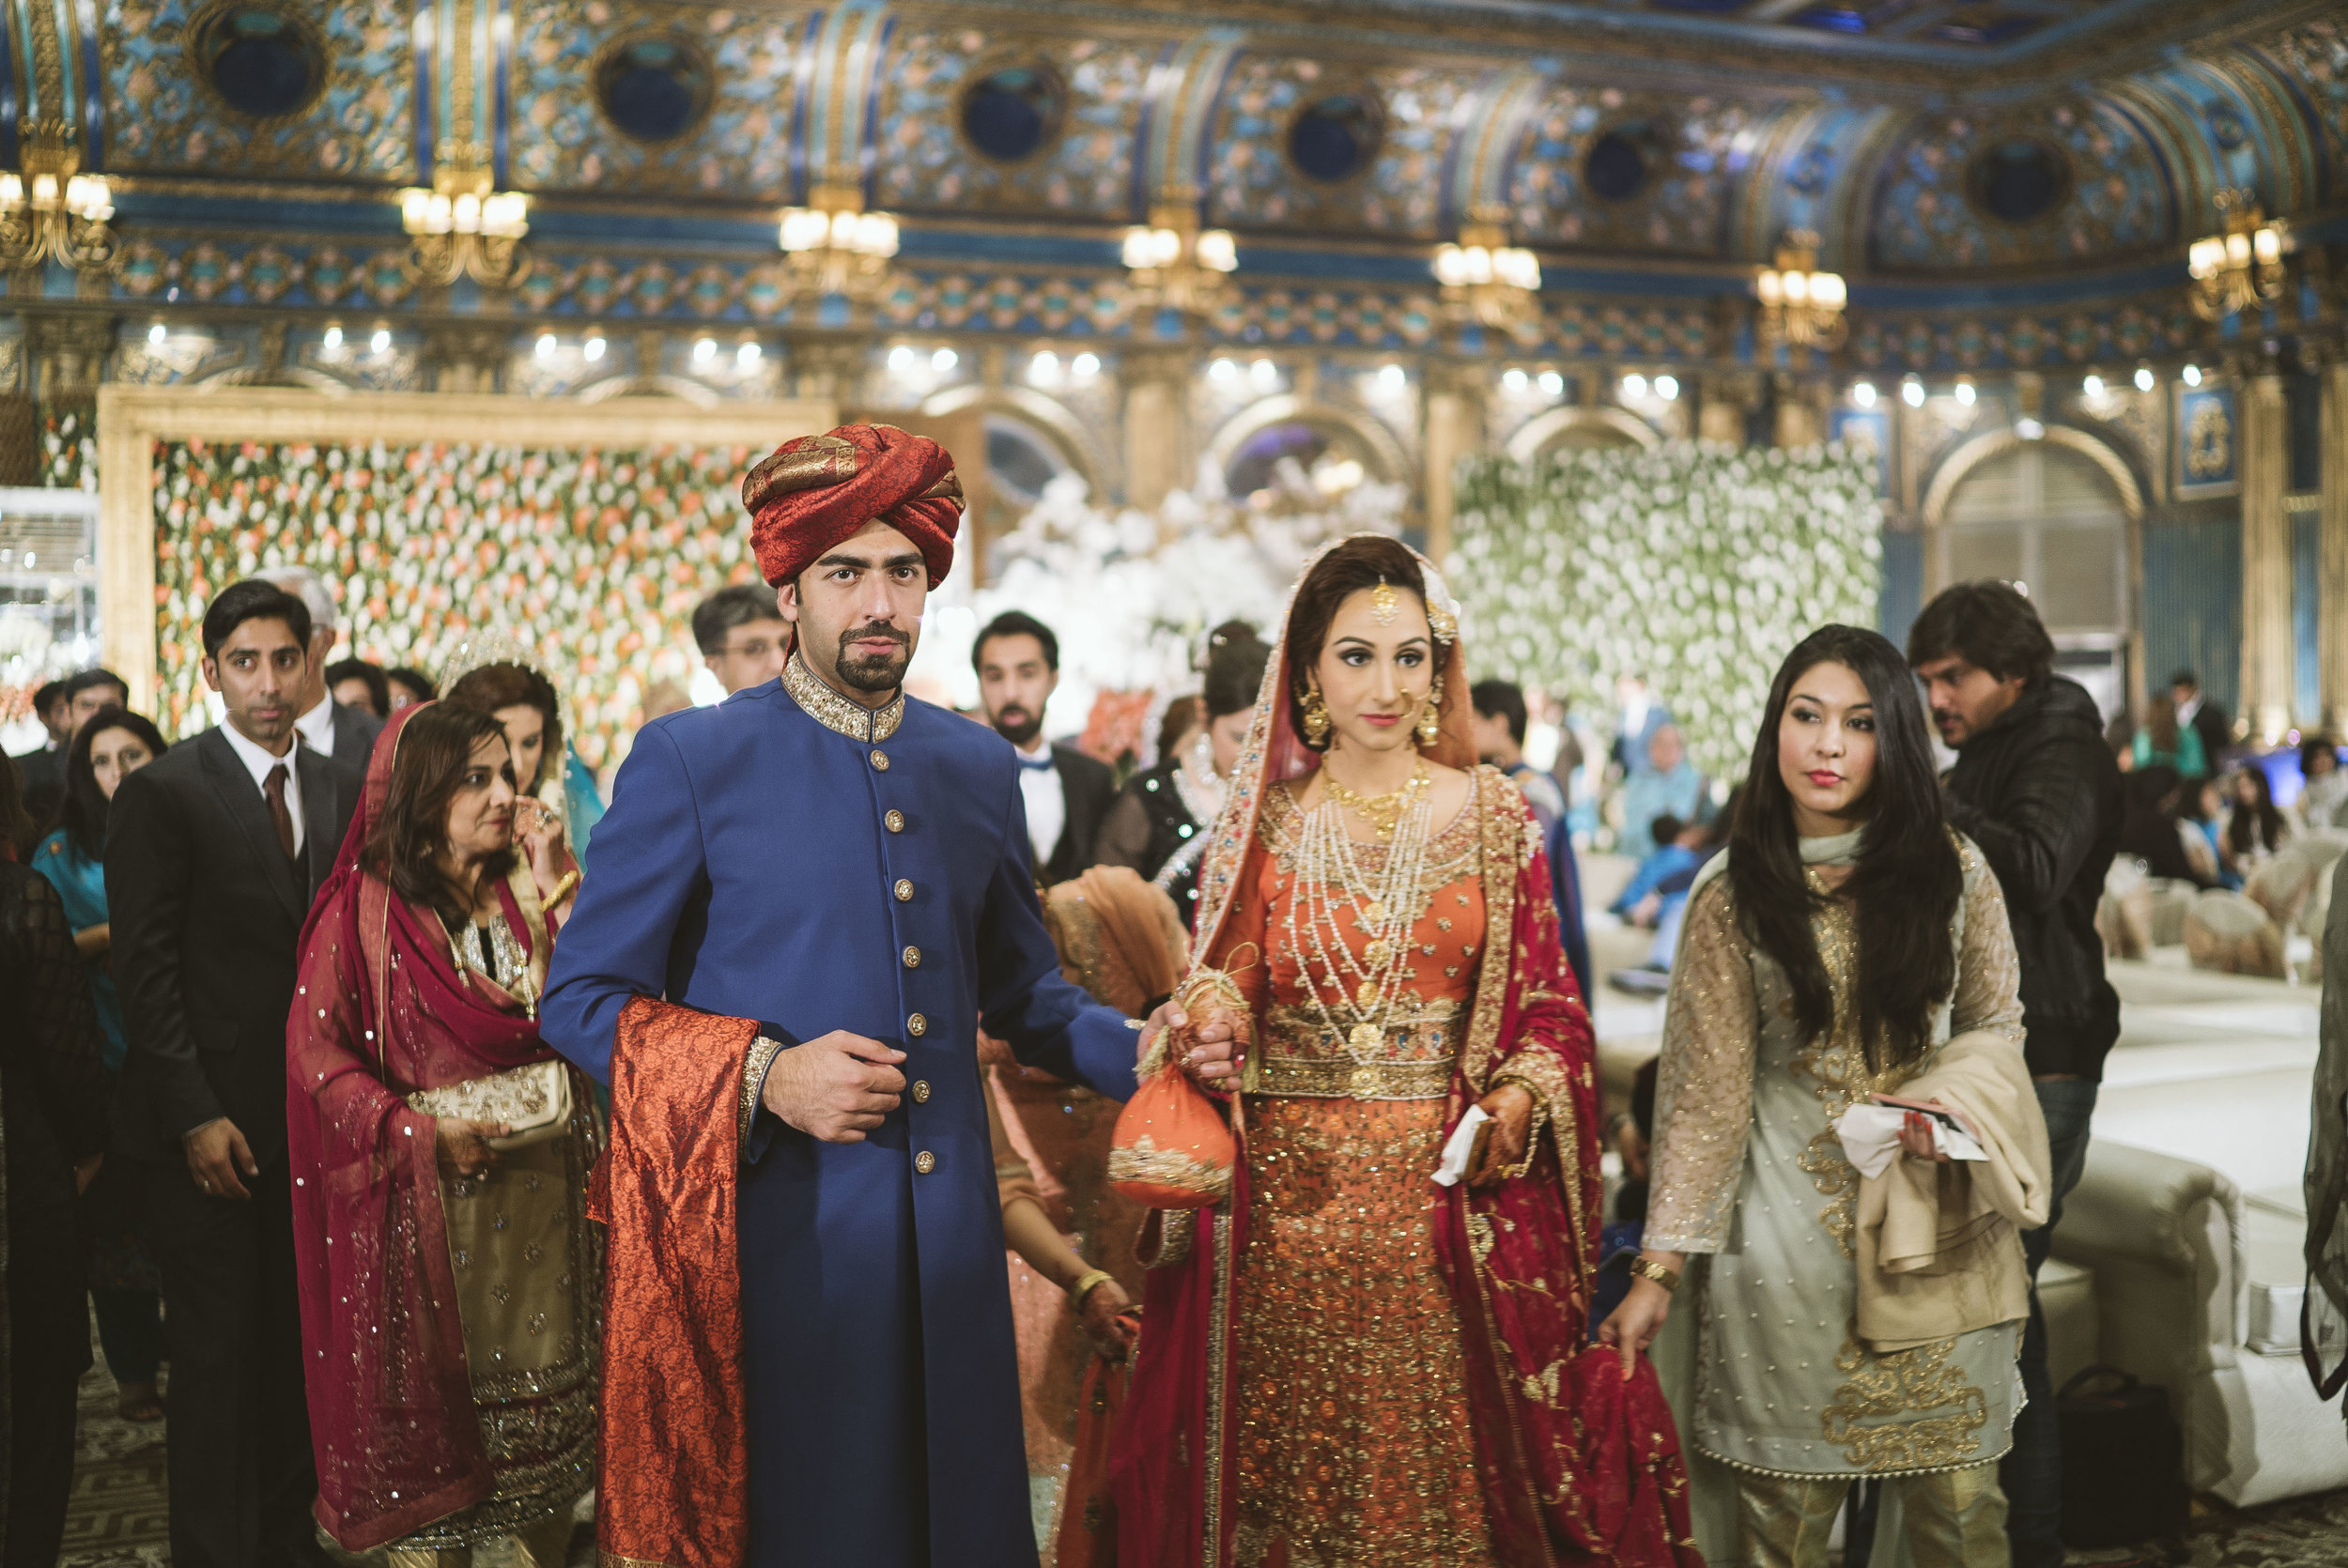  Kashif Malik escorts his new wife Sadaf out of the wedding venue on the day of their  baraat . She is about to head to his family's home and spend the night there for the first time. 